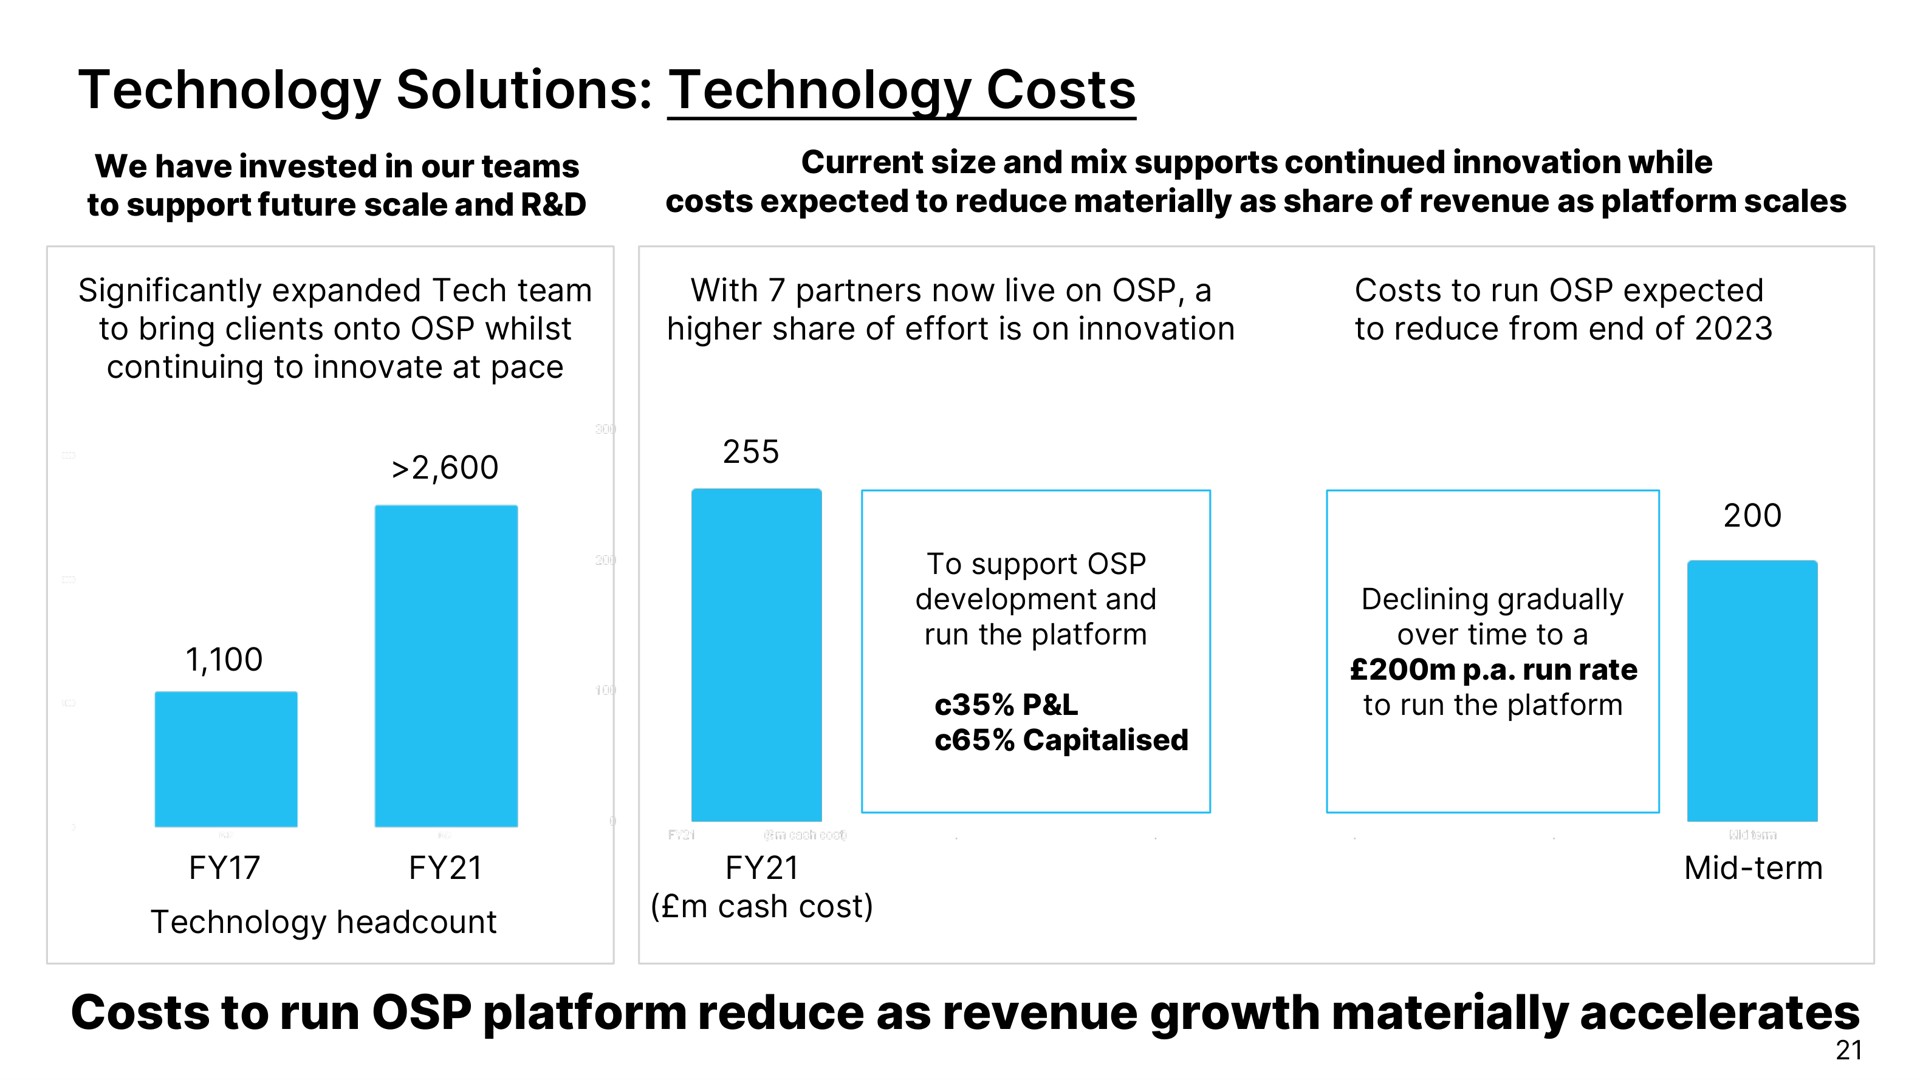 technology solutions technology costs costs to run platform reduce as revenue growth materially accelerates | Ocado